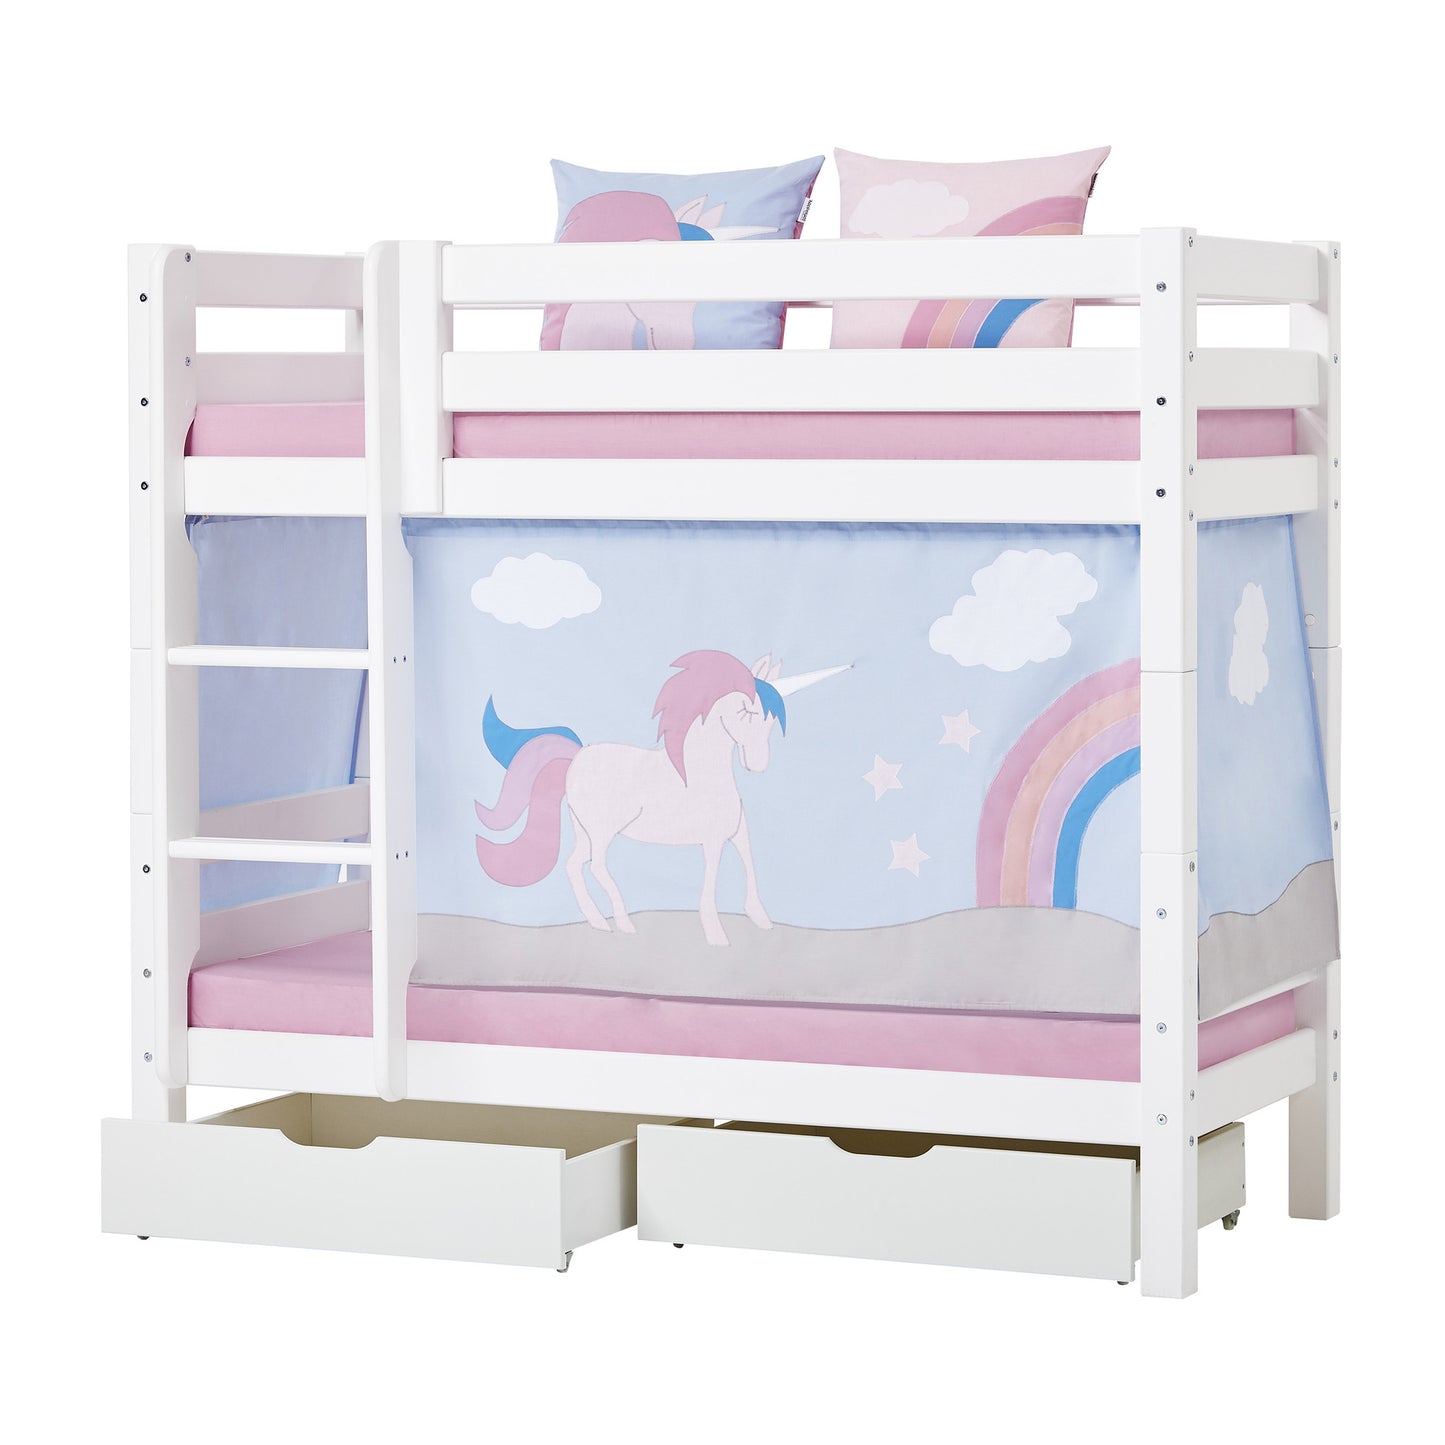 Unicorn - Curtain for half-high and bunk bed - 70x160 cm